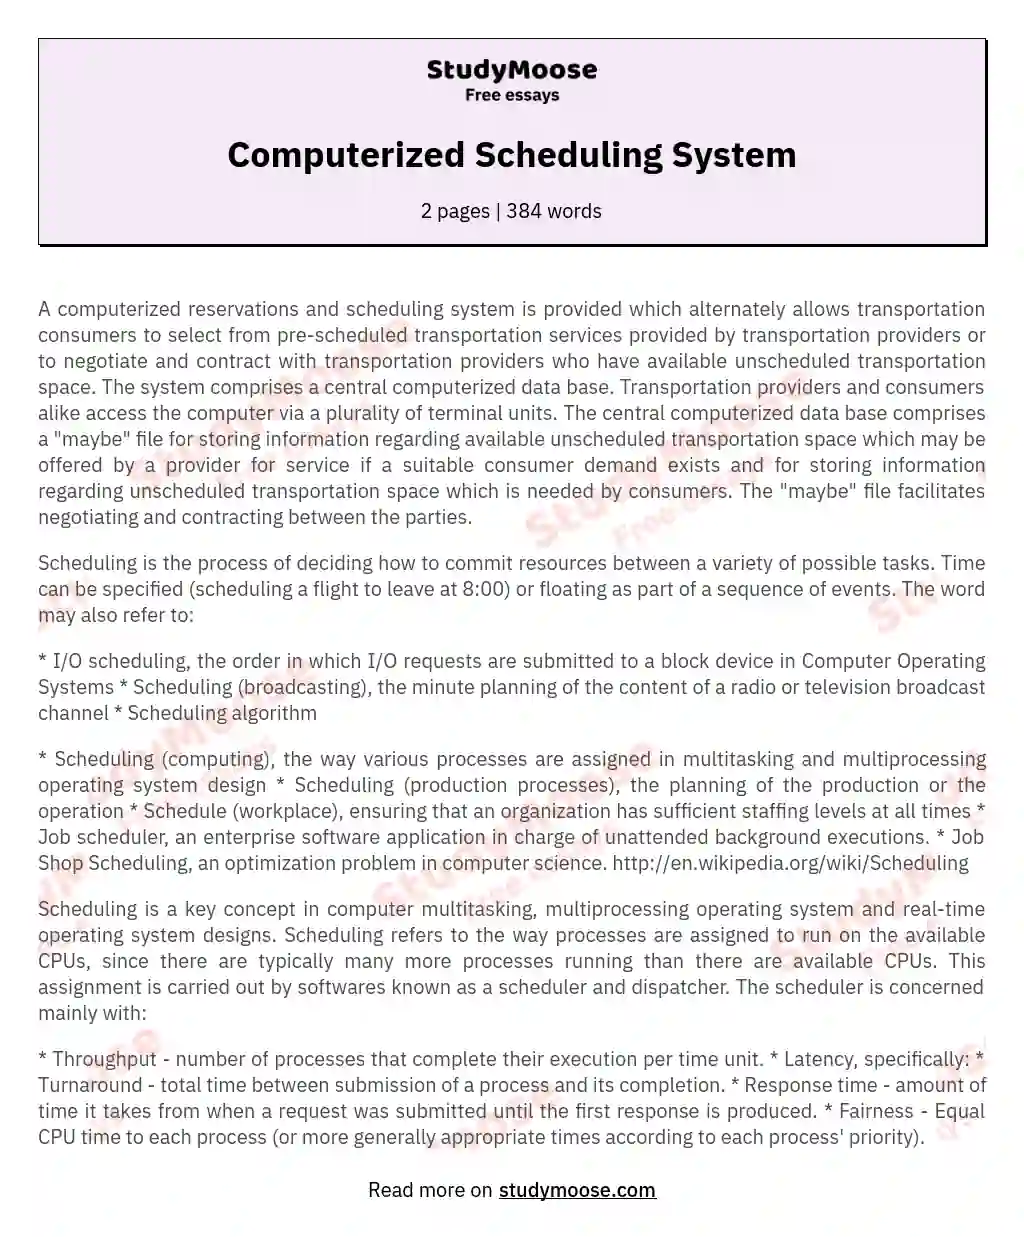 Computerized Scheduling System